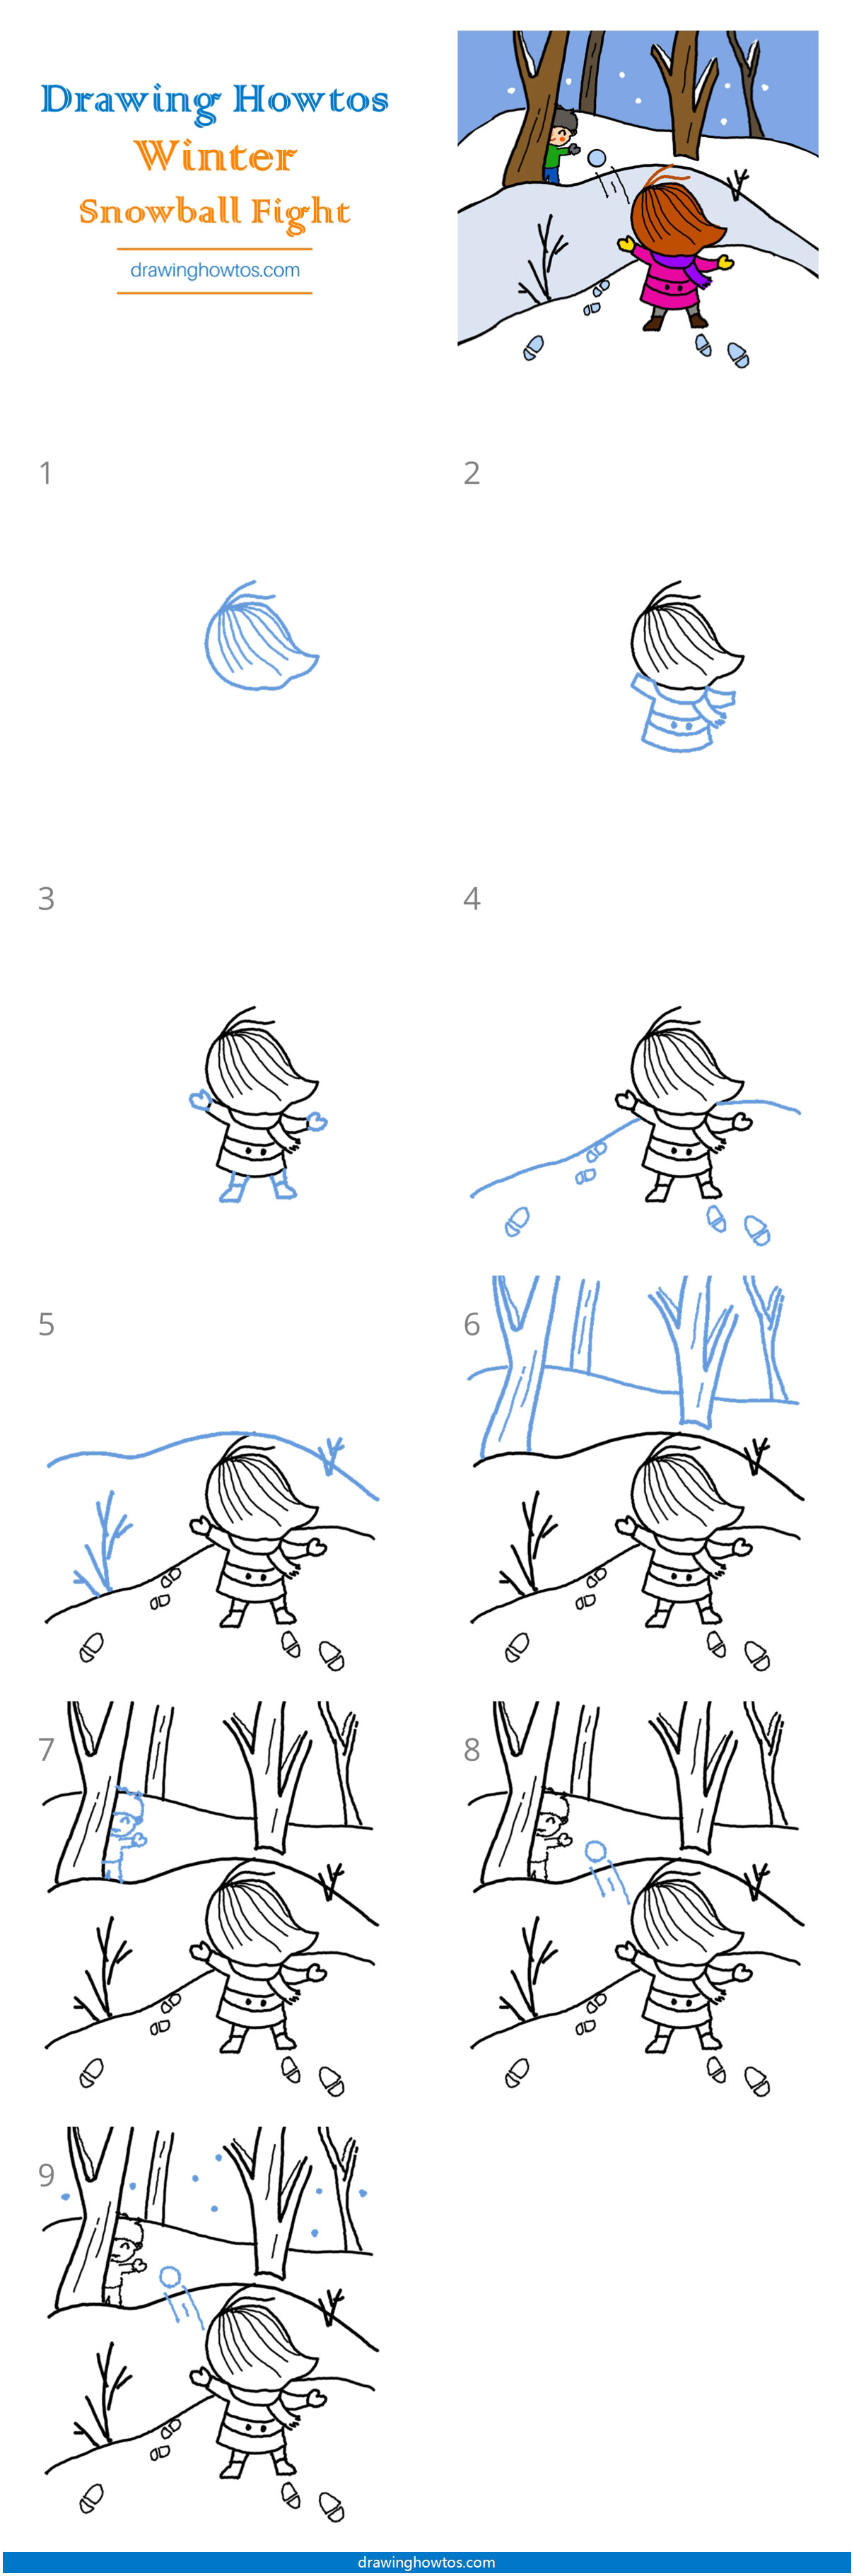 How to Draw Kids Playing Snowballs in Winter Step by Step